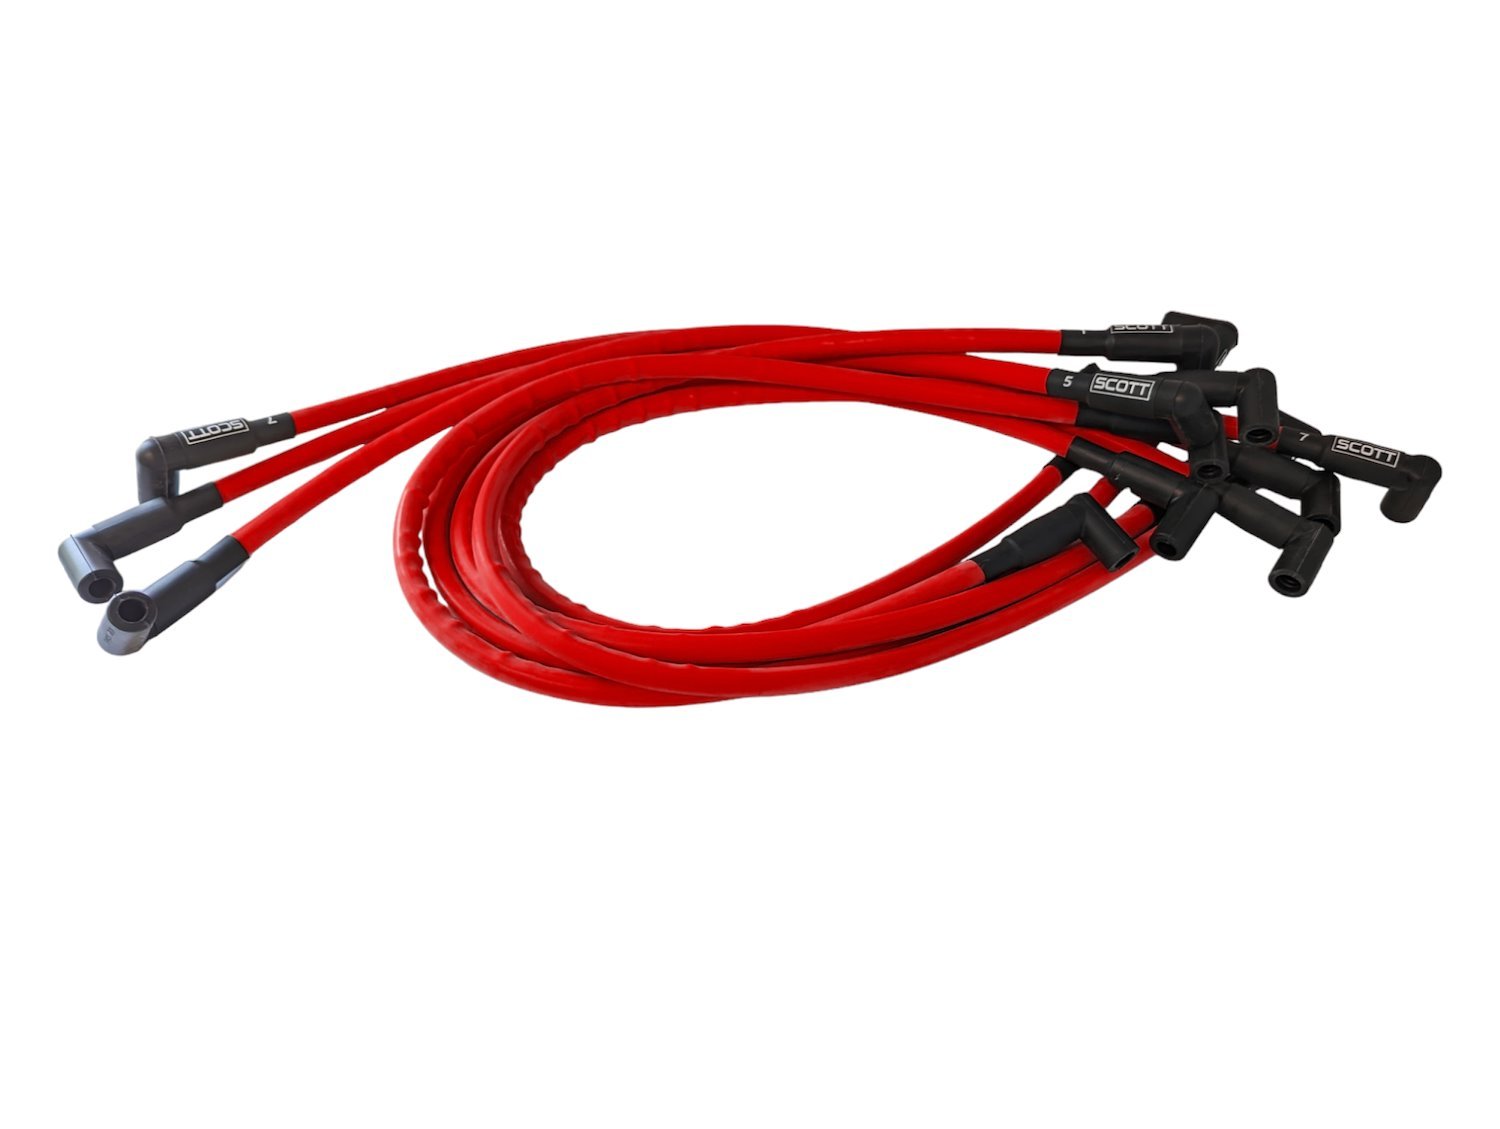 SPW-CH-416-2 High-Performance Silicone-Sleeved Spark Plug Wire Set for Big Block Chevy, Under Header [Red]